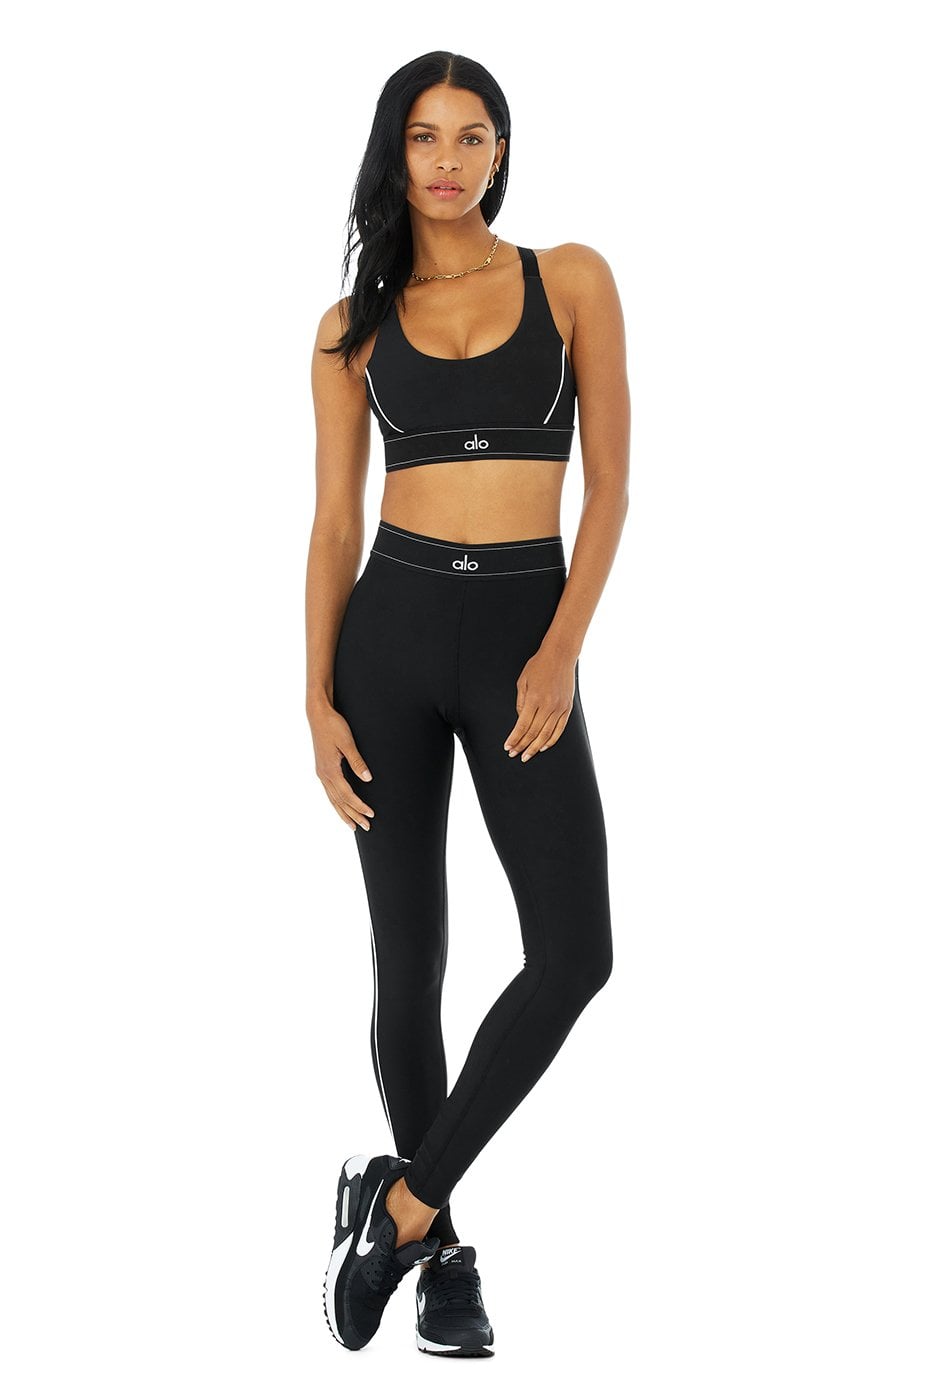 Alo Airlift High-Waist Suit Up Legging & Airlift Suit Up Bra Set, Alo Has  a Bunch of Cute Sets You Can Both Work Out and Lounge In